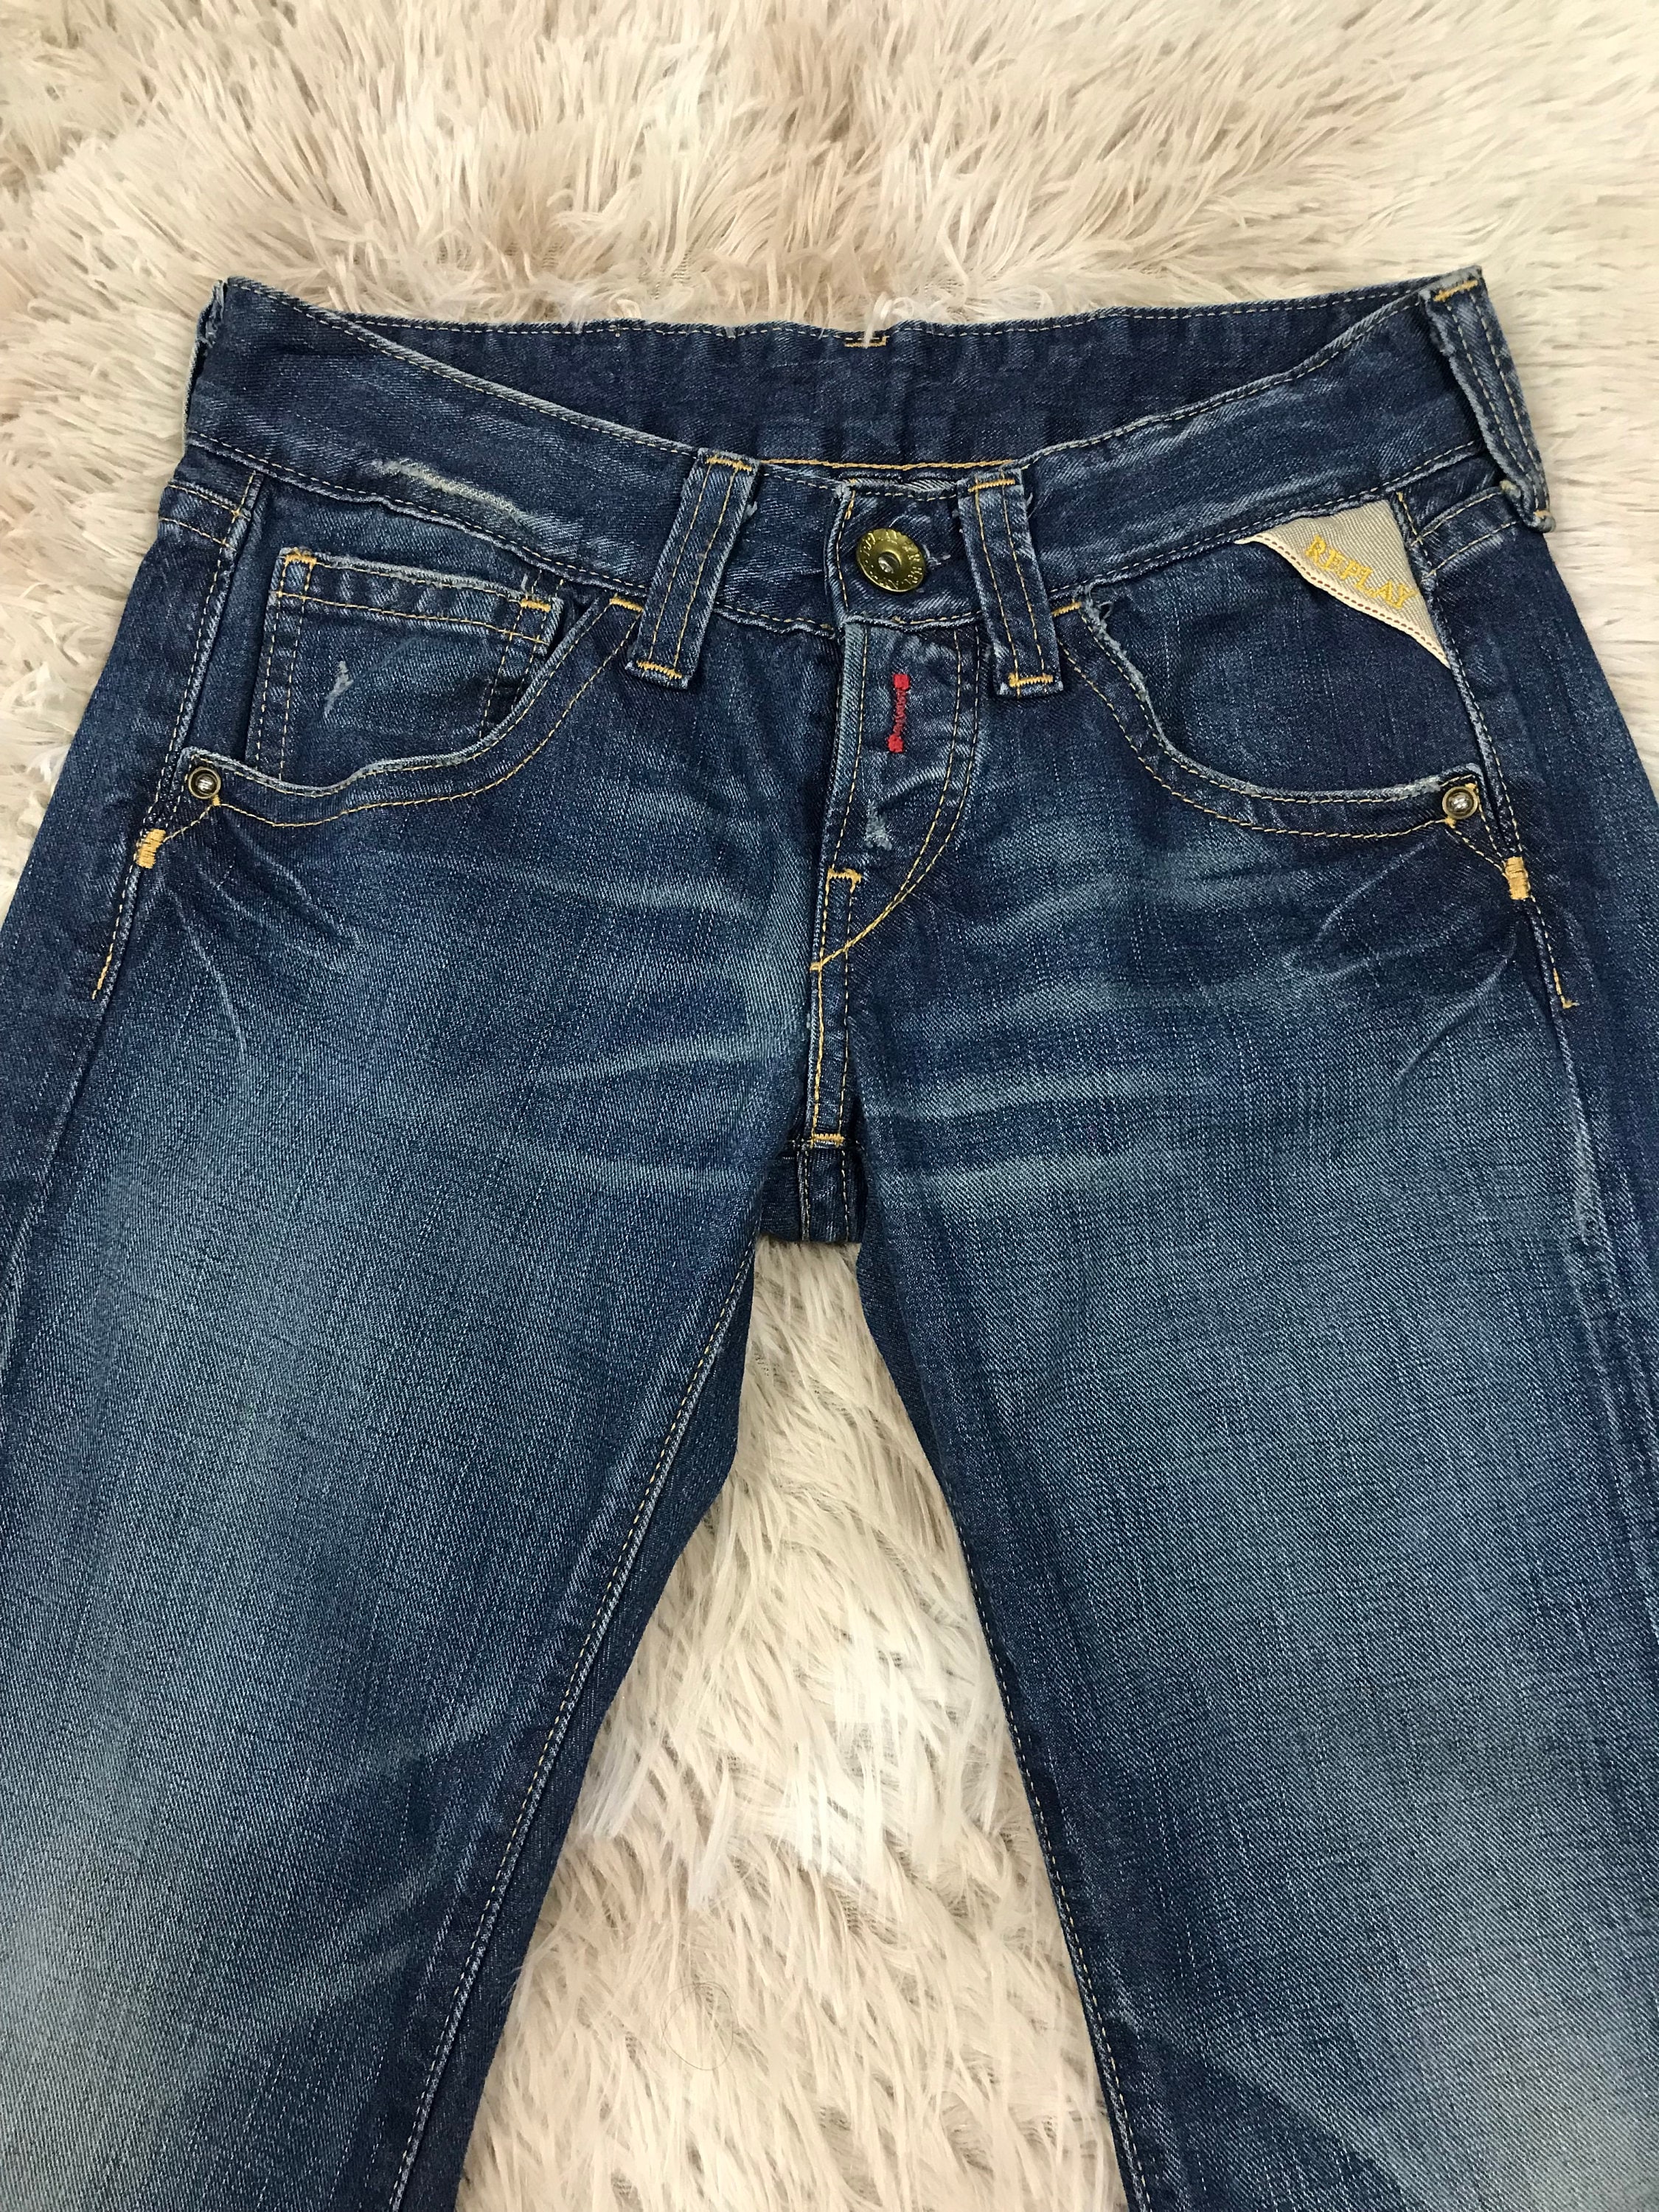 Vintage Replay Jeans - Etsy